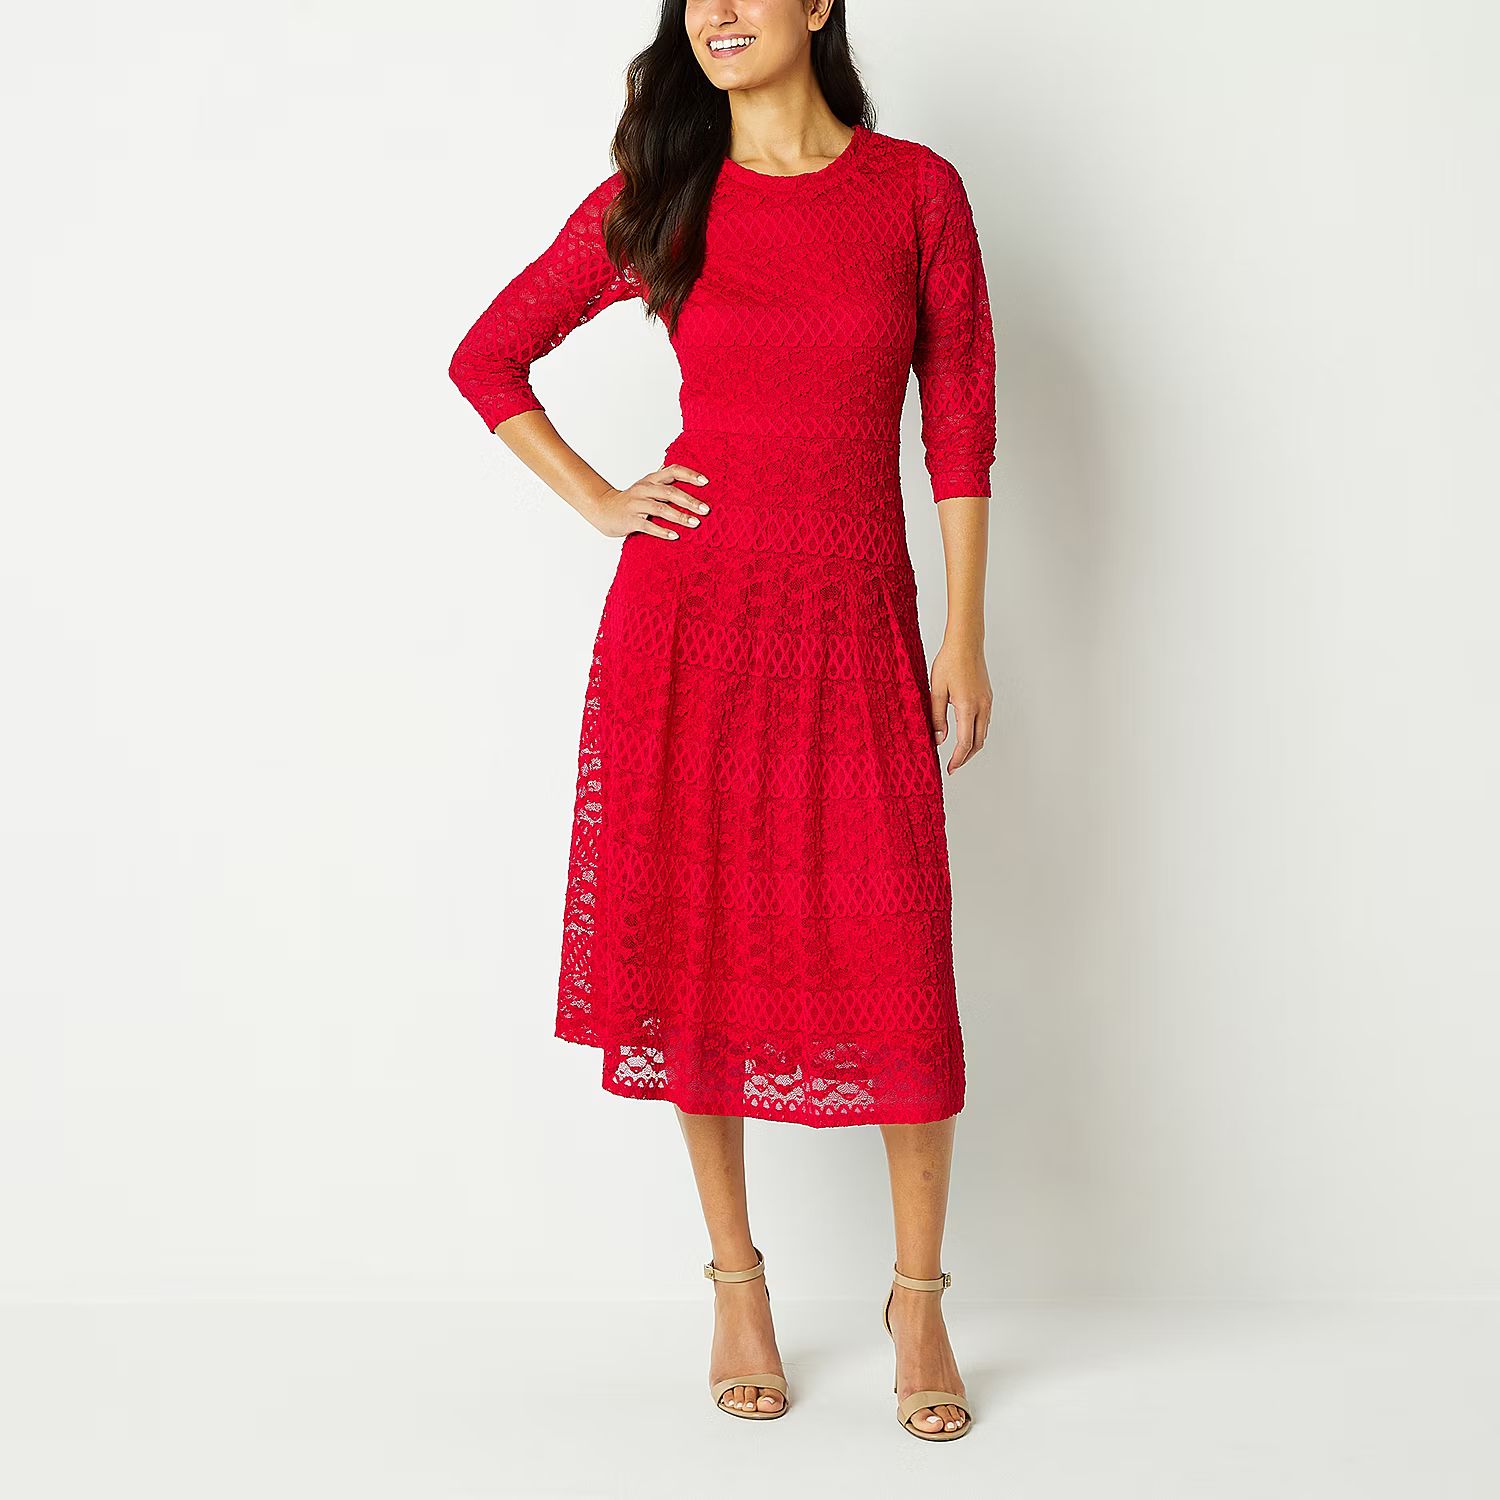 new!Perceptions 3/4 Sleeve Lace Midi Fit + Flare Dress | JCPenney